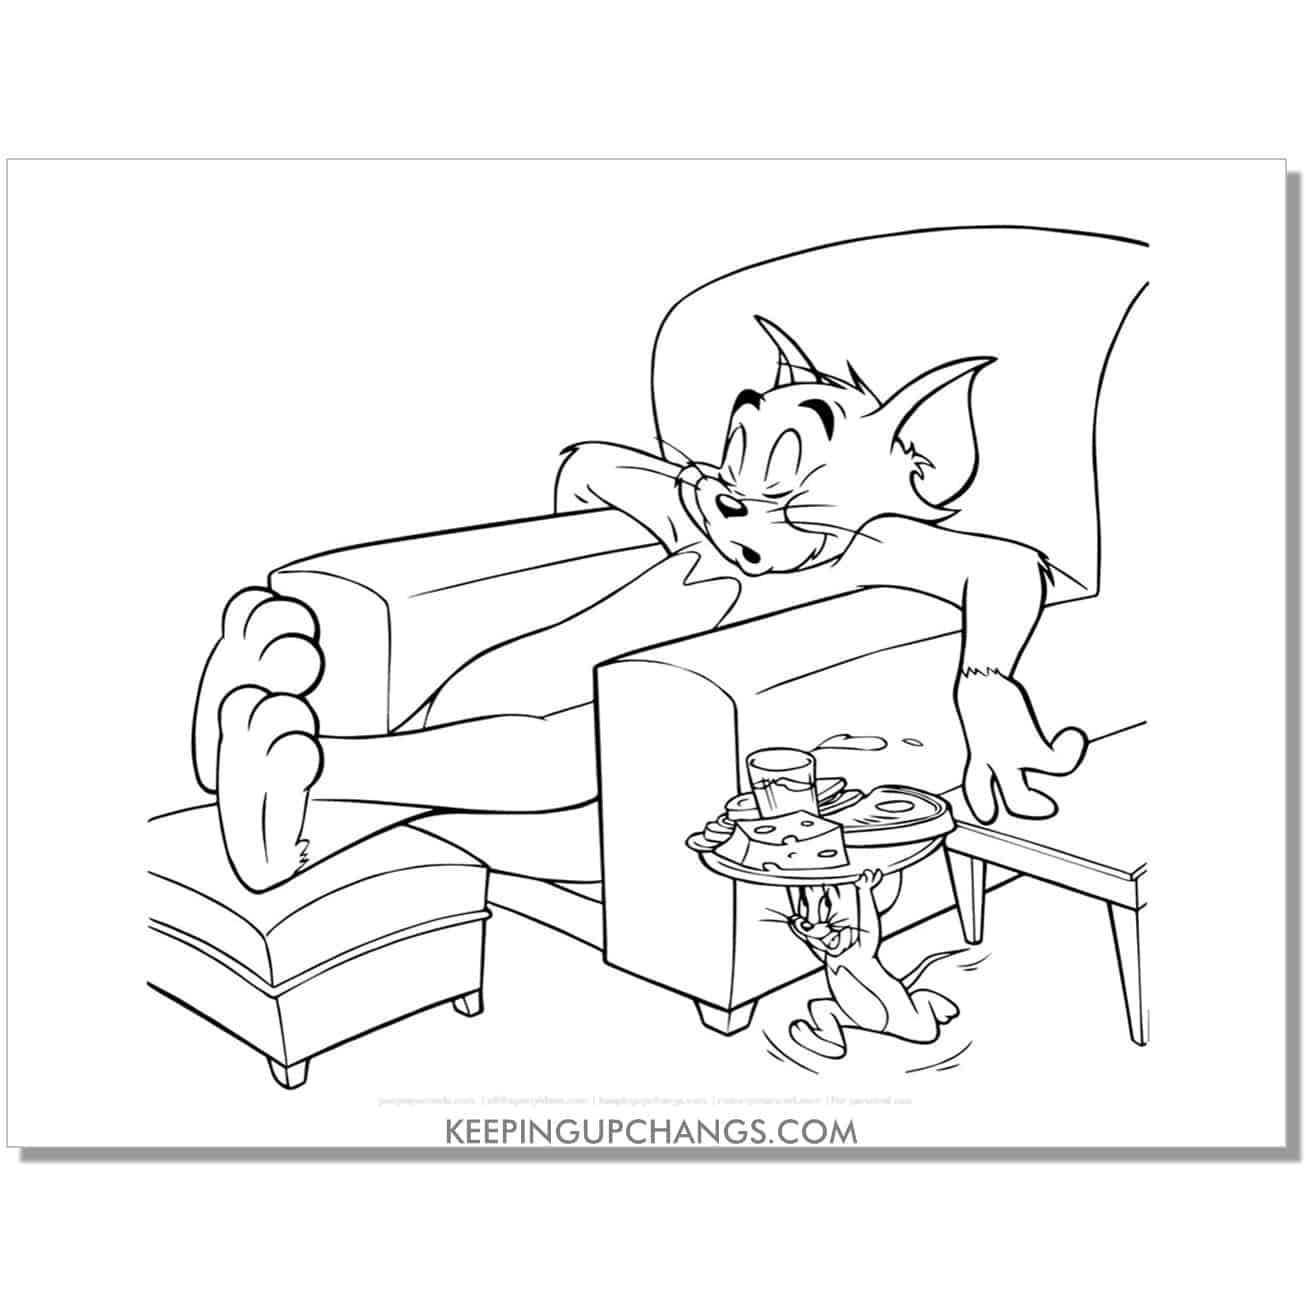 free tom sleeping in recliner and jerry whisking cheese away coloring page.